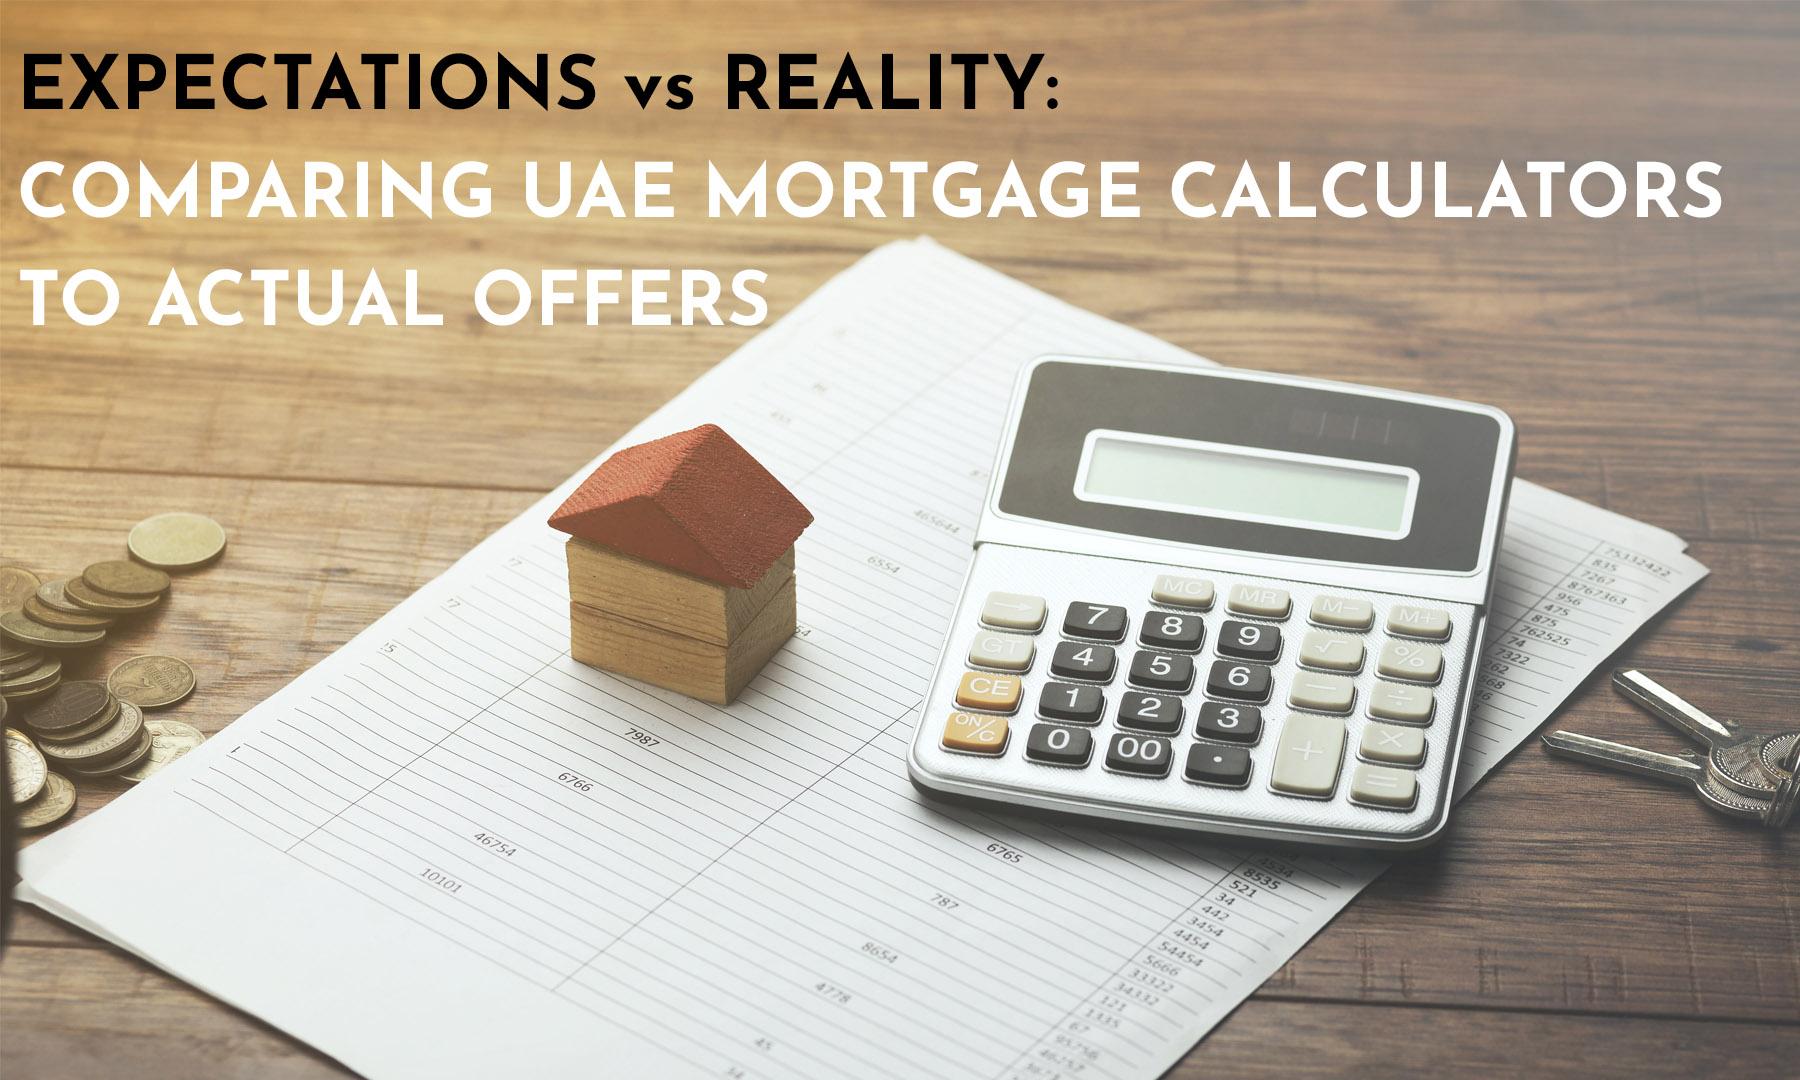 EXPECTATIONS VS REALITY : COMPARING UAE MORTGAGE CALCULATORS TO ACTUAL OFFERS